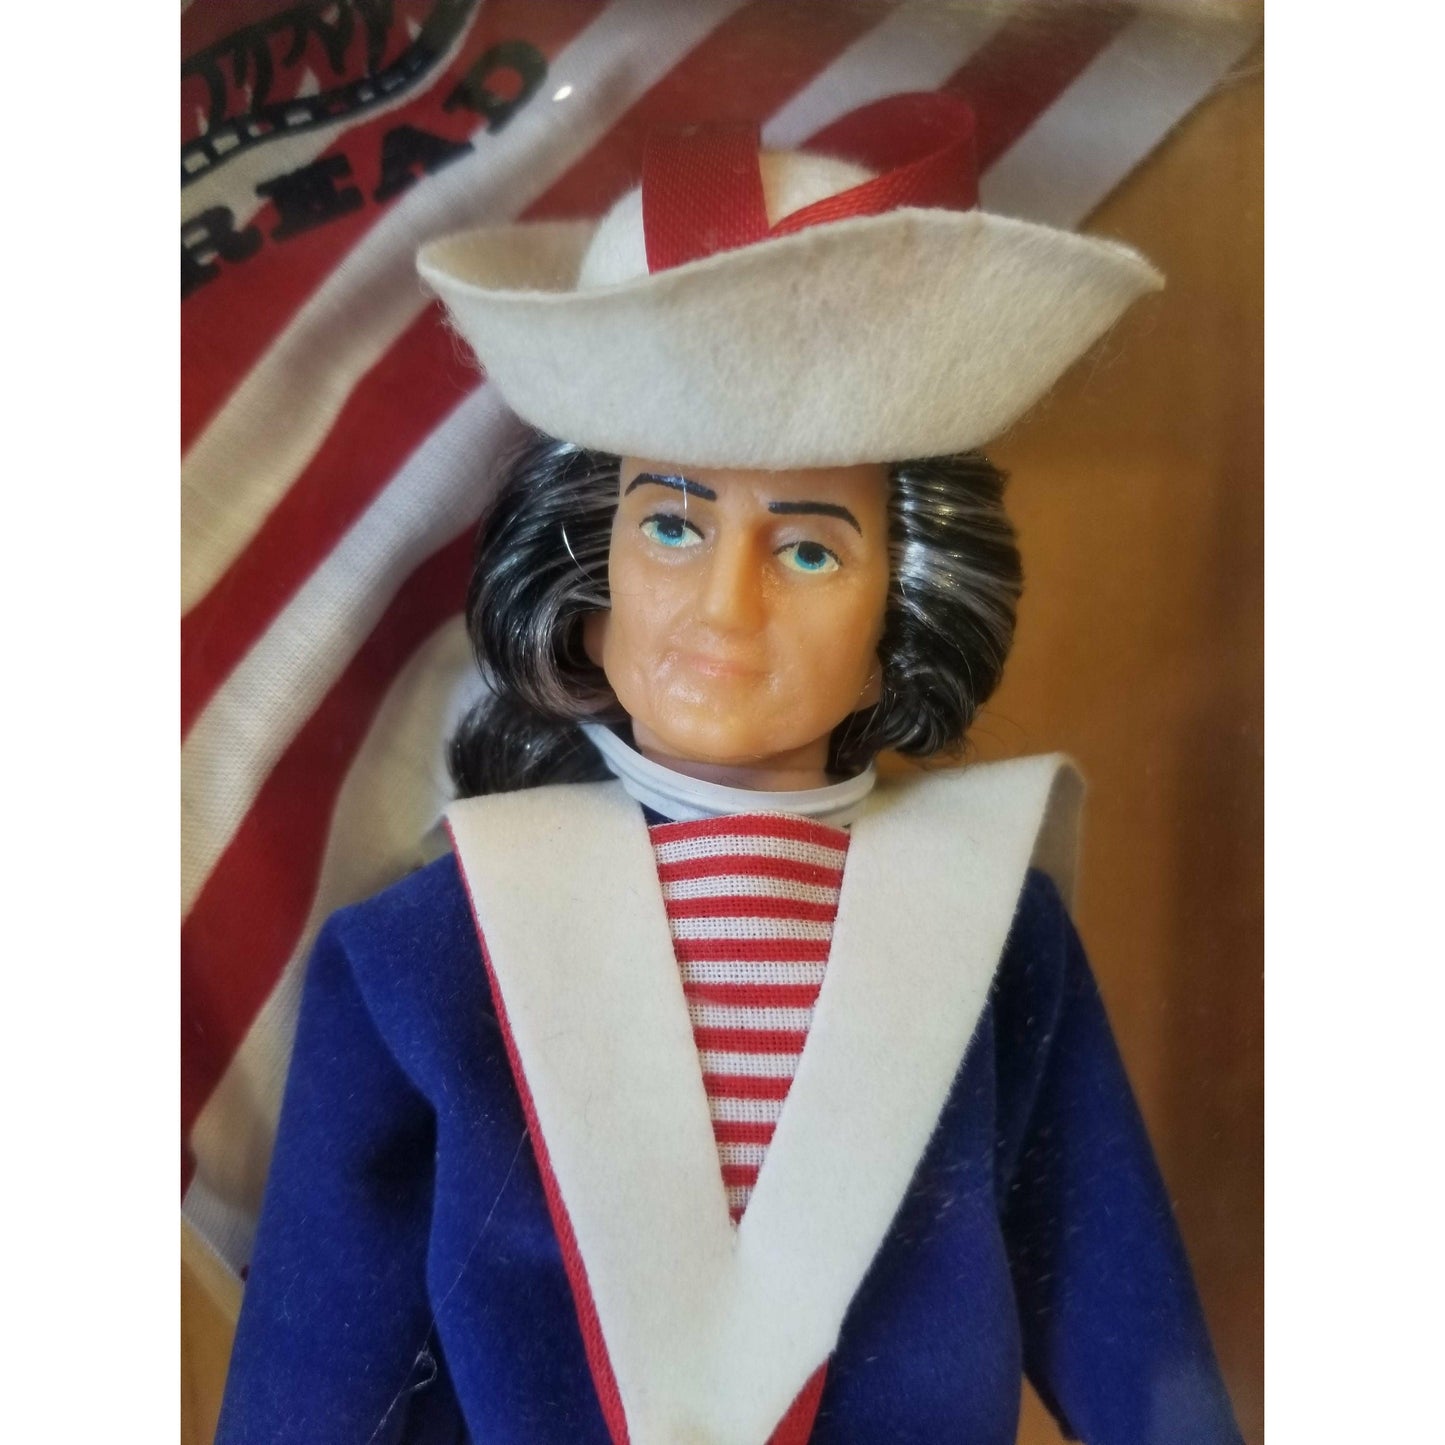 Vintage 1976 Our American Heritage Doll ~ First Naval Jack ~ 7" Tall ~ Brand New in Package ~ NRFB ~ Don't Tread on Me Flag Included